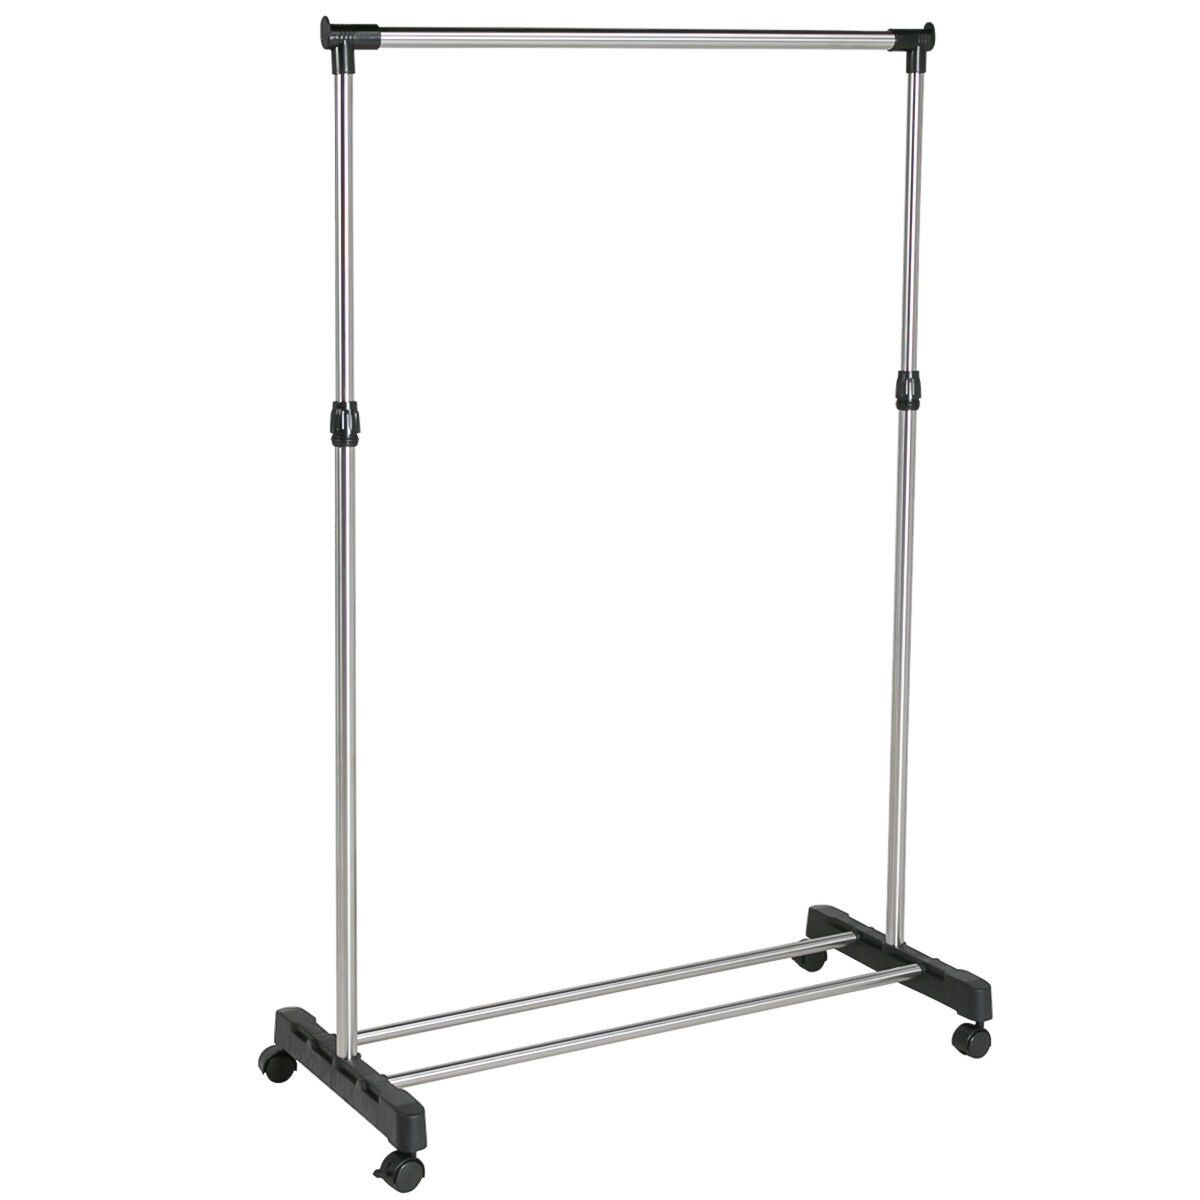 Clothing Rail with 1-Rod Pole | Shop Today. Get it Tomorrow! | takealot.com